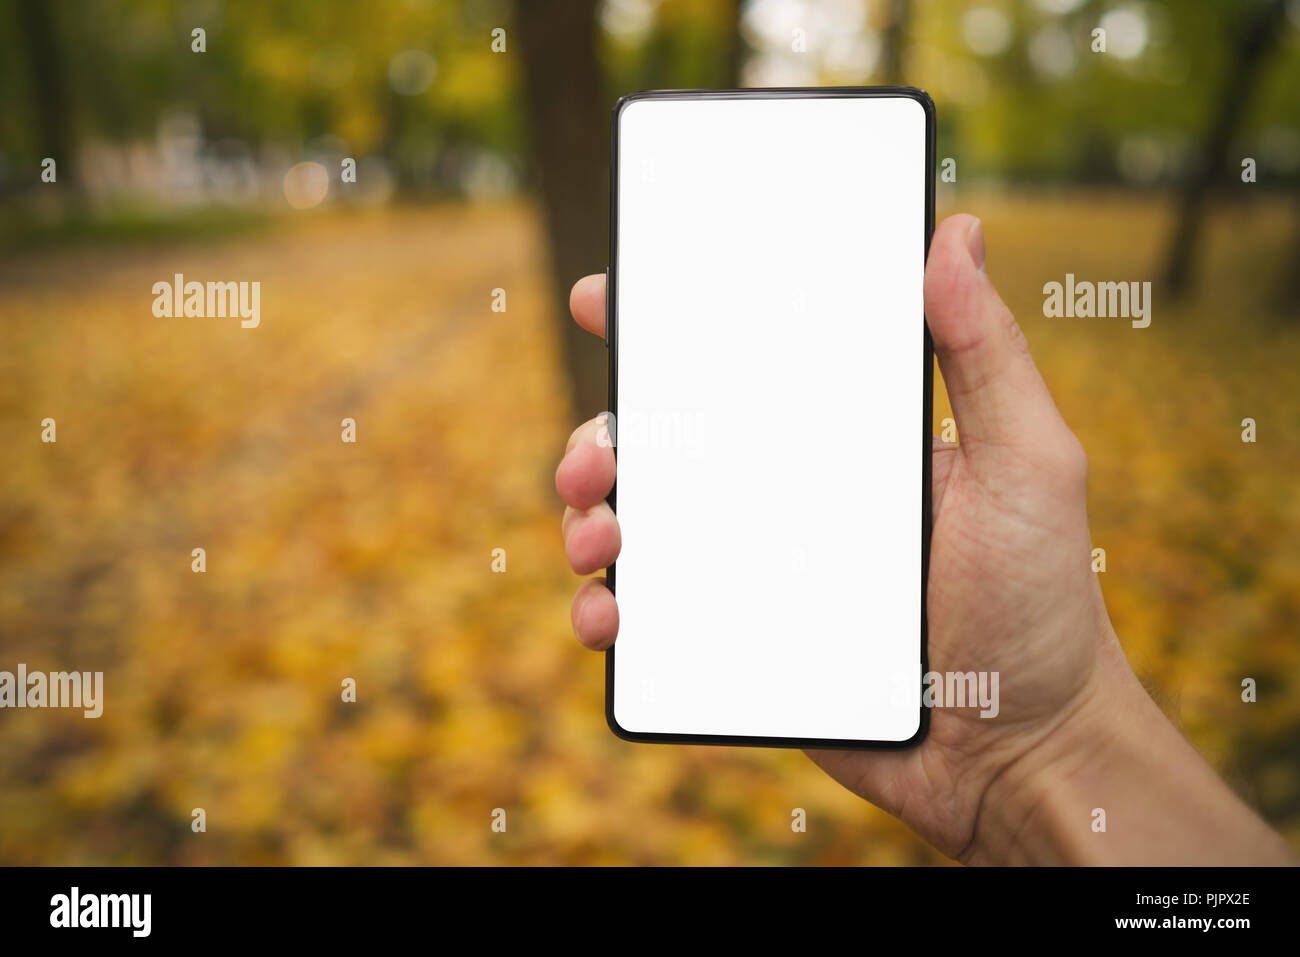 young man hand holding smartphone with white screen outdoors against autumn sidewalk, copy space Stock Photo